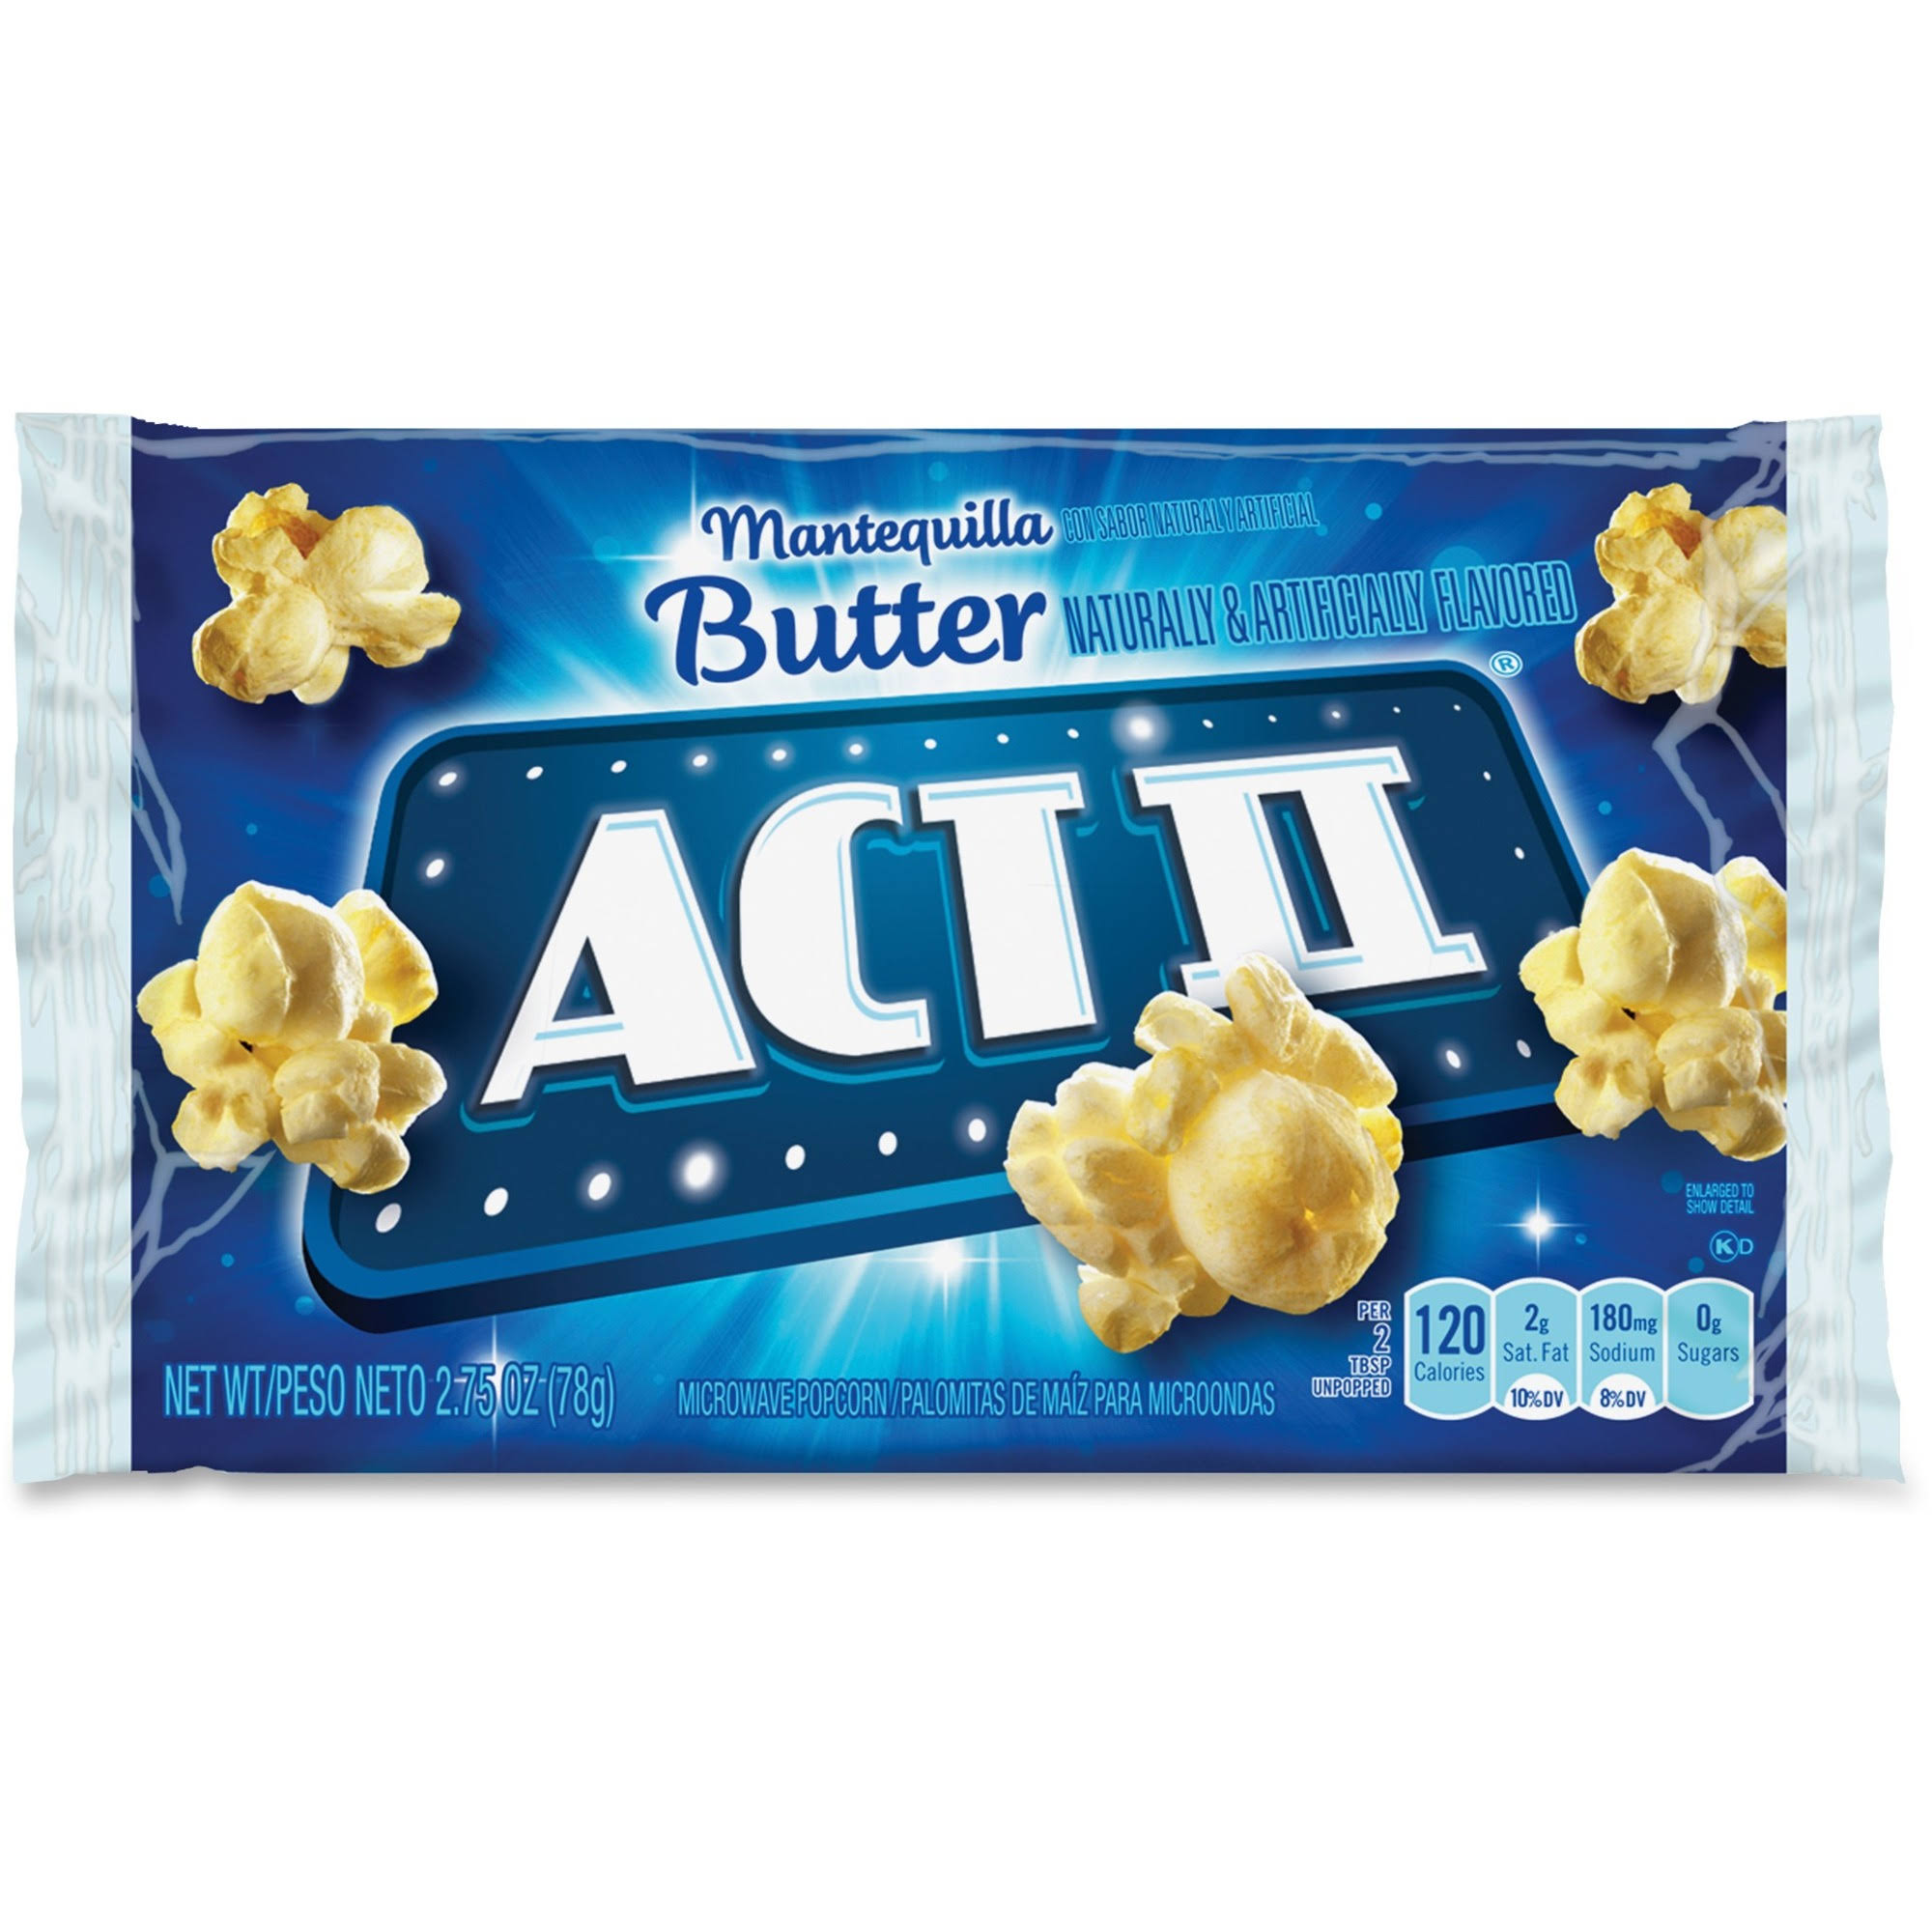 Act II Butter Microwave Popcorn - 2.75 oz